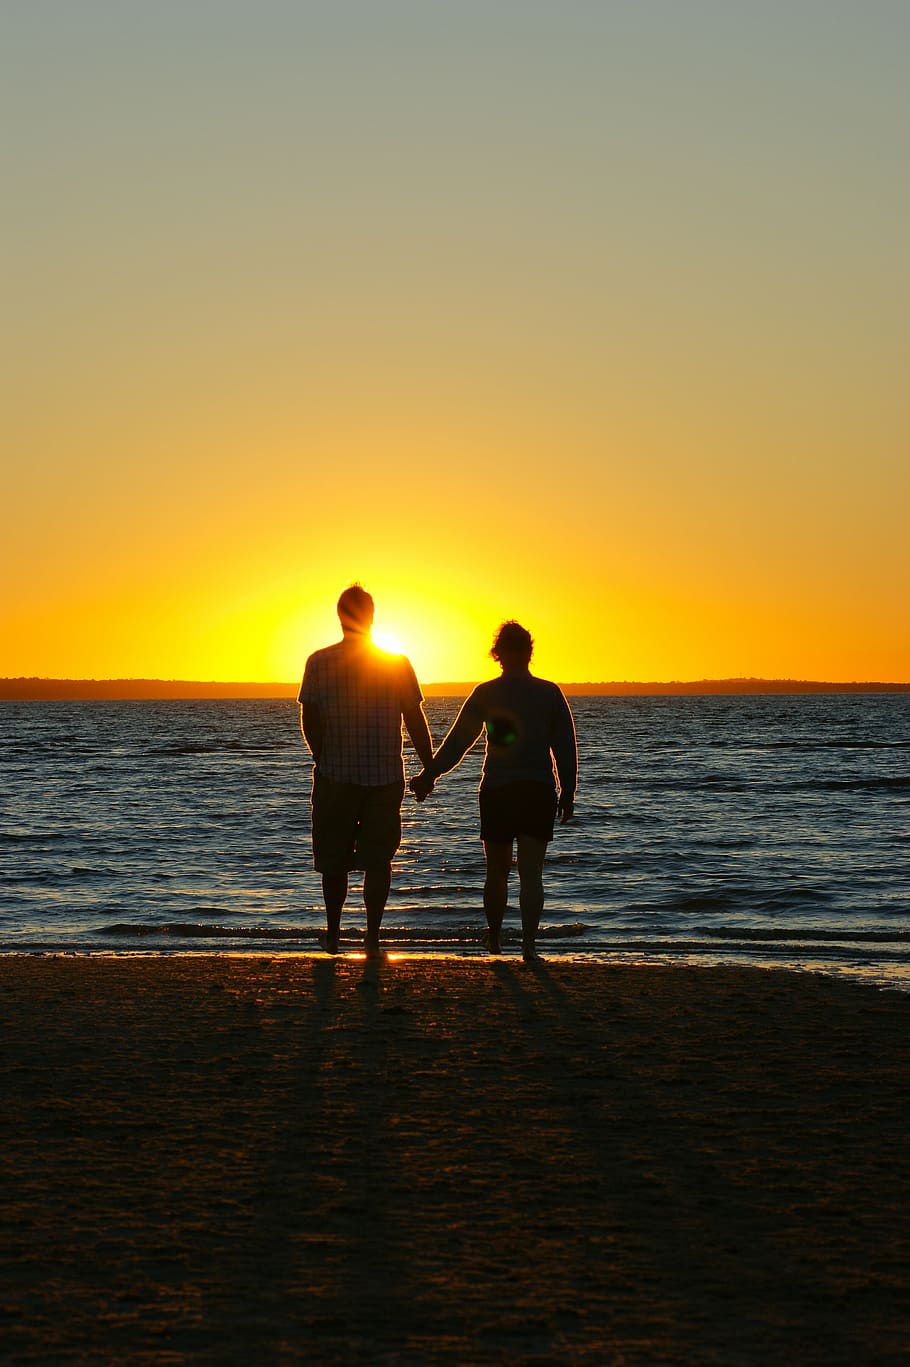 A couple holding hands on a beach with a sunset in the background.